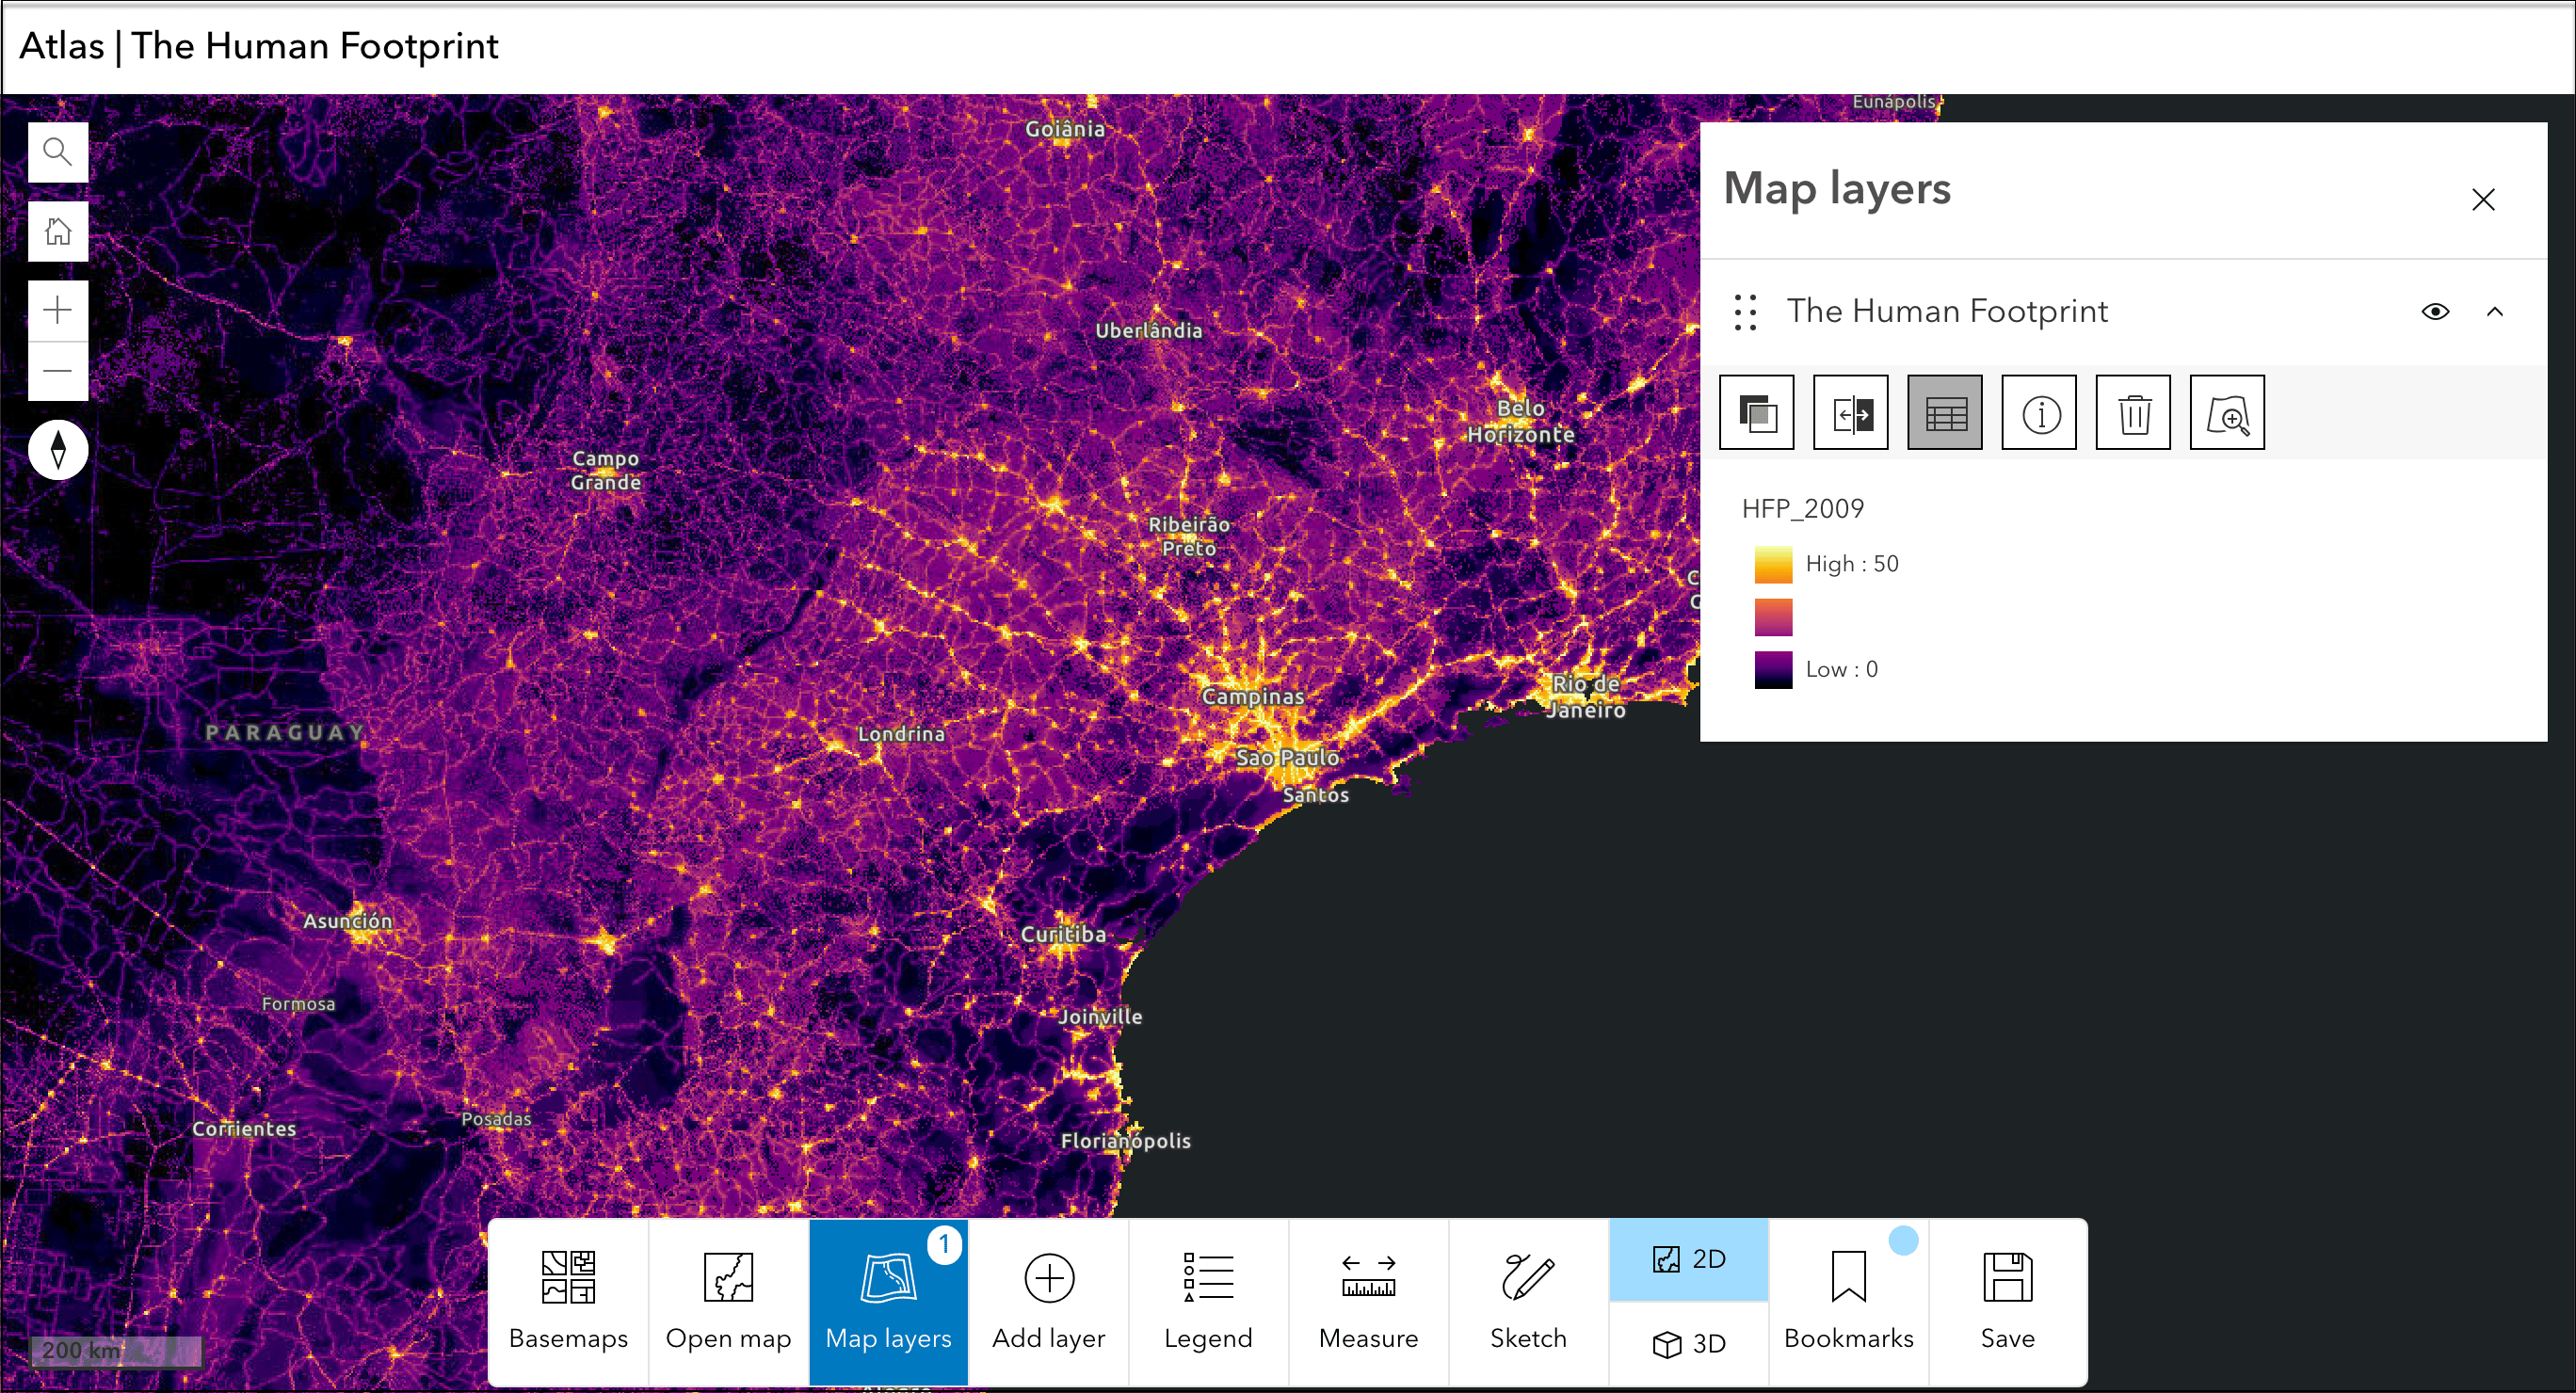 Image of Map layers in Atlas